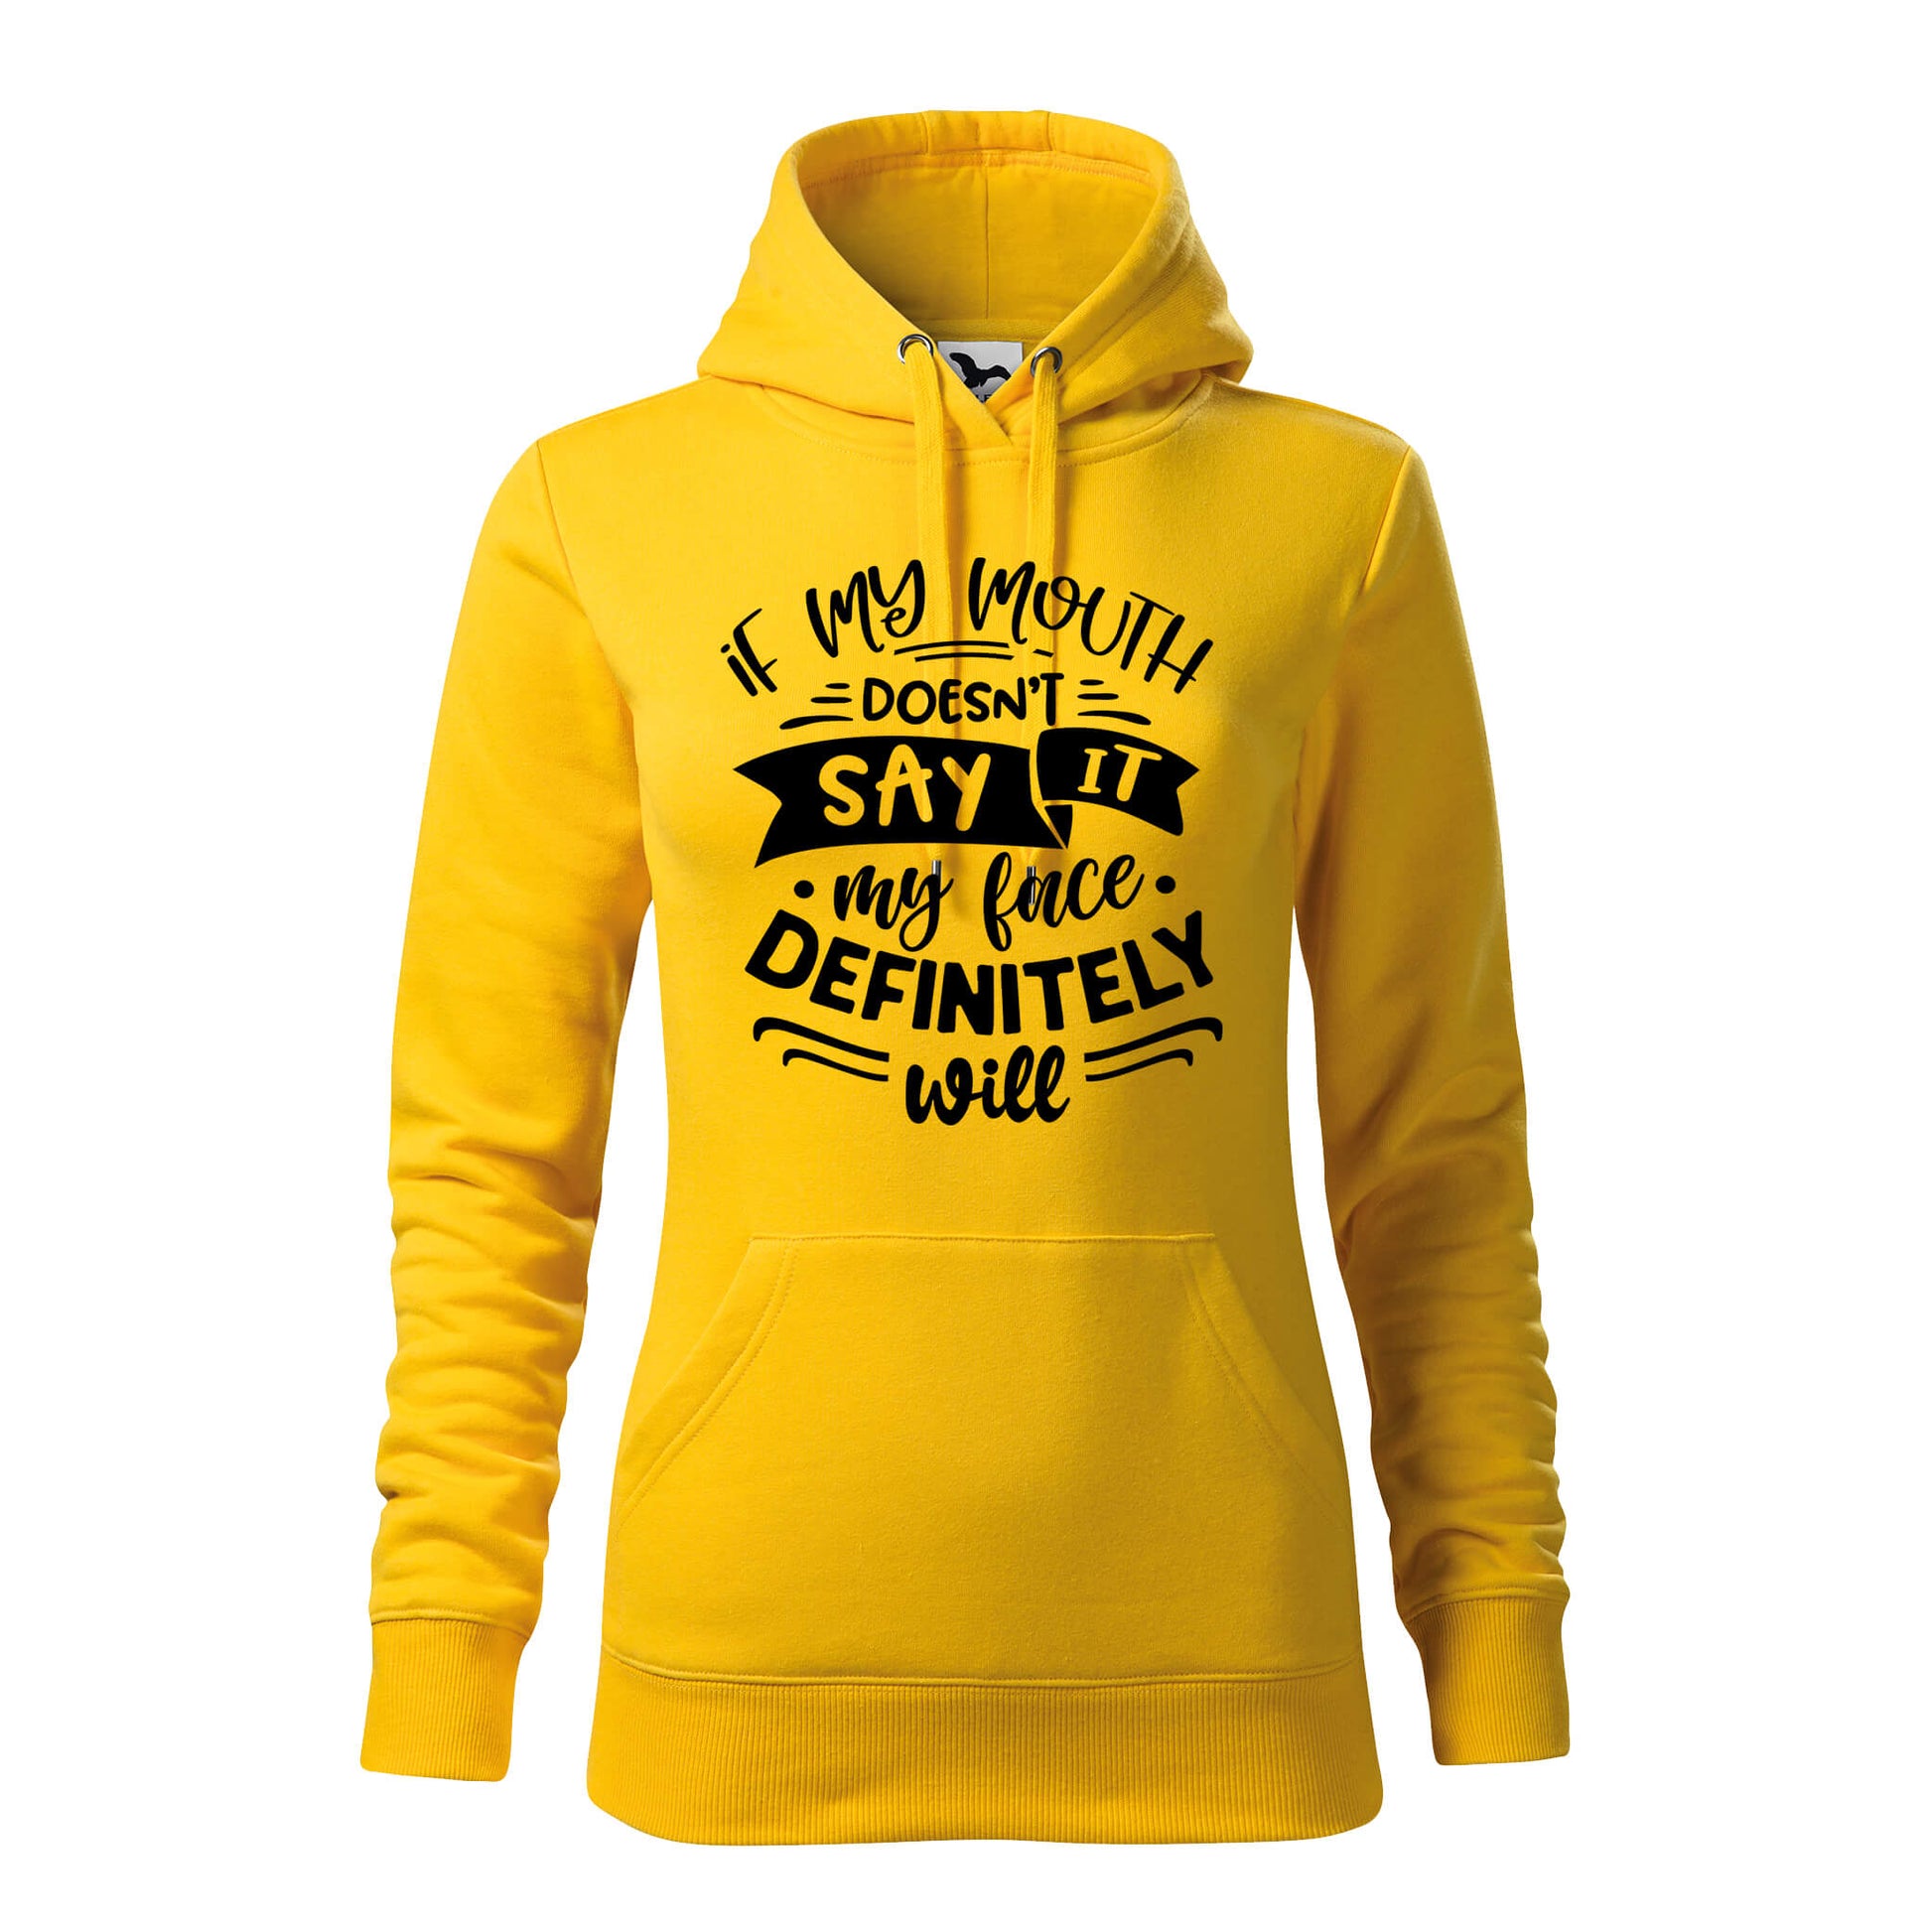 My mouth doesnt say it hoodie - rvdesignprint